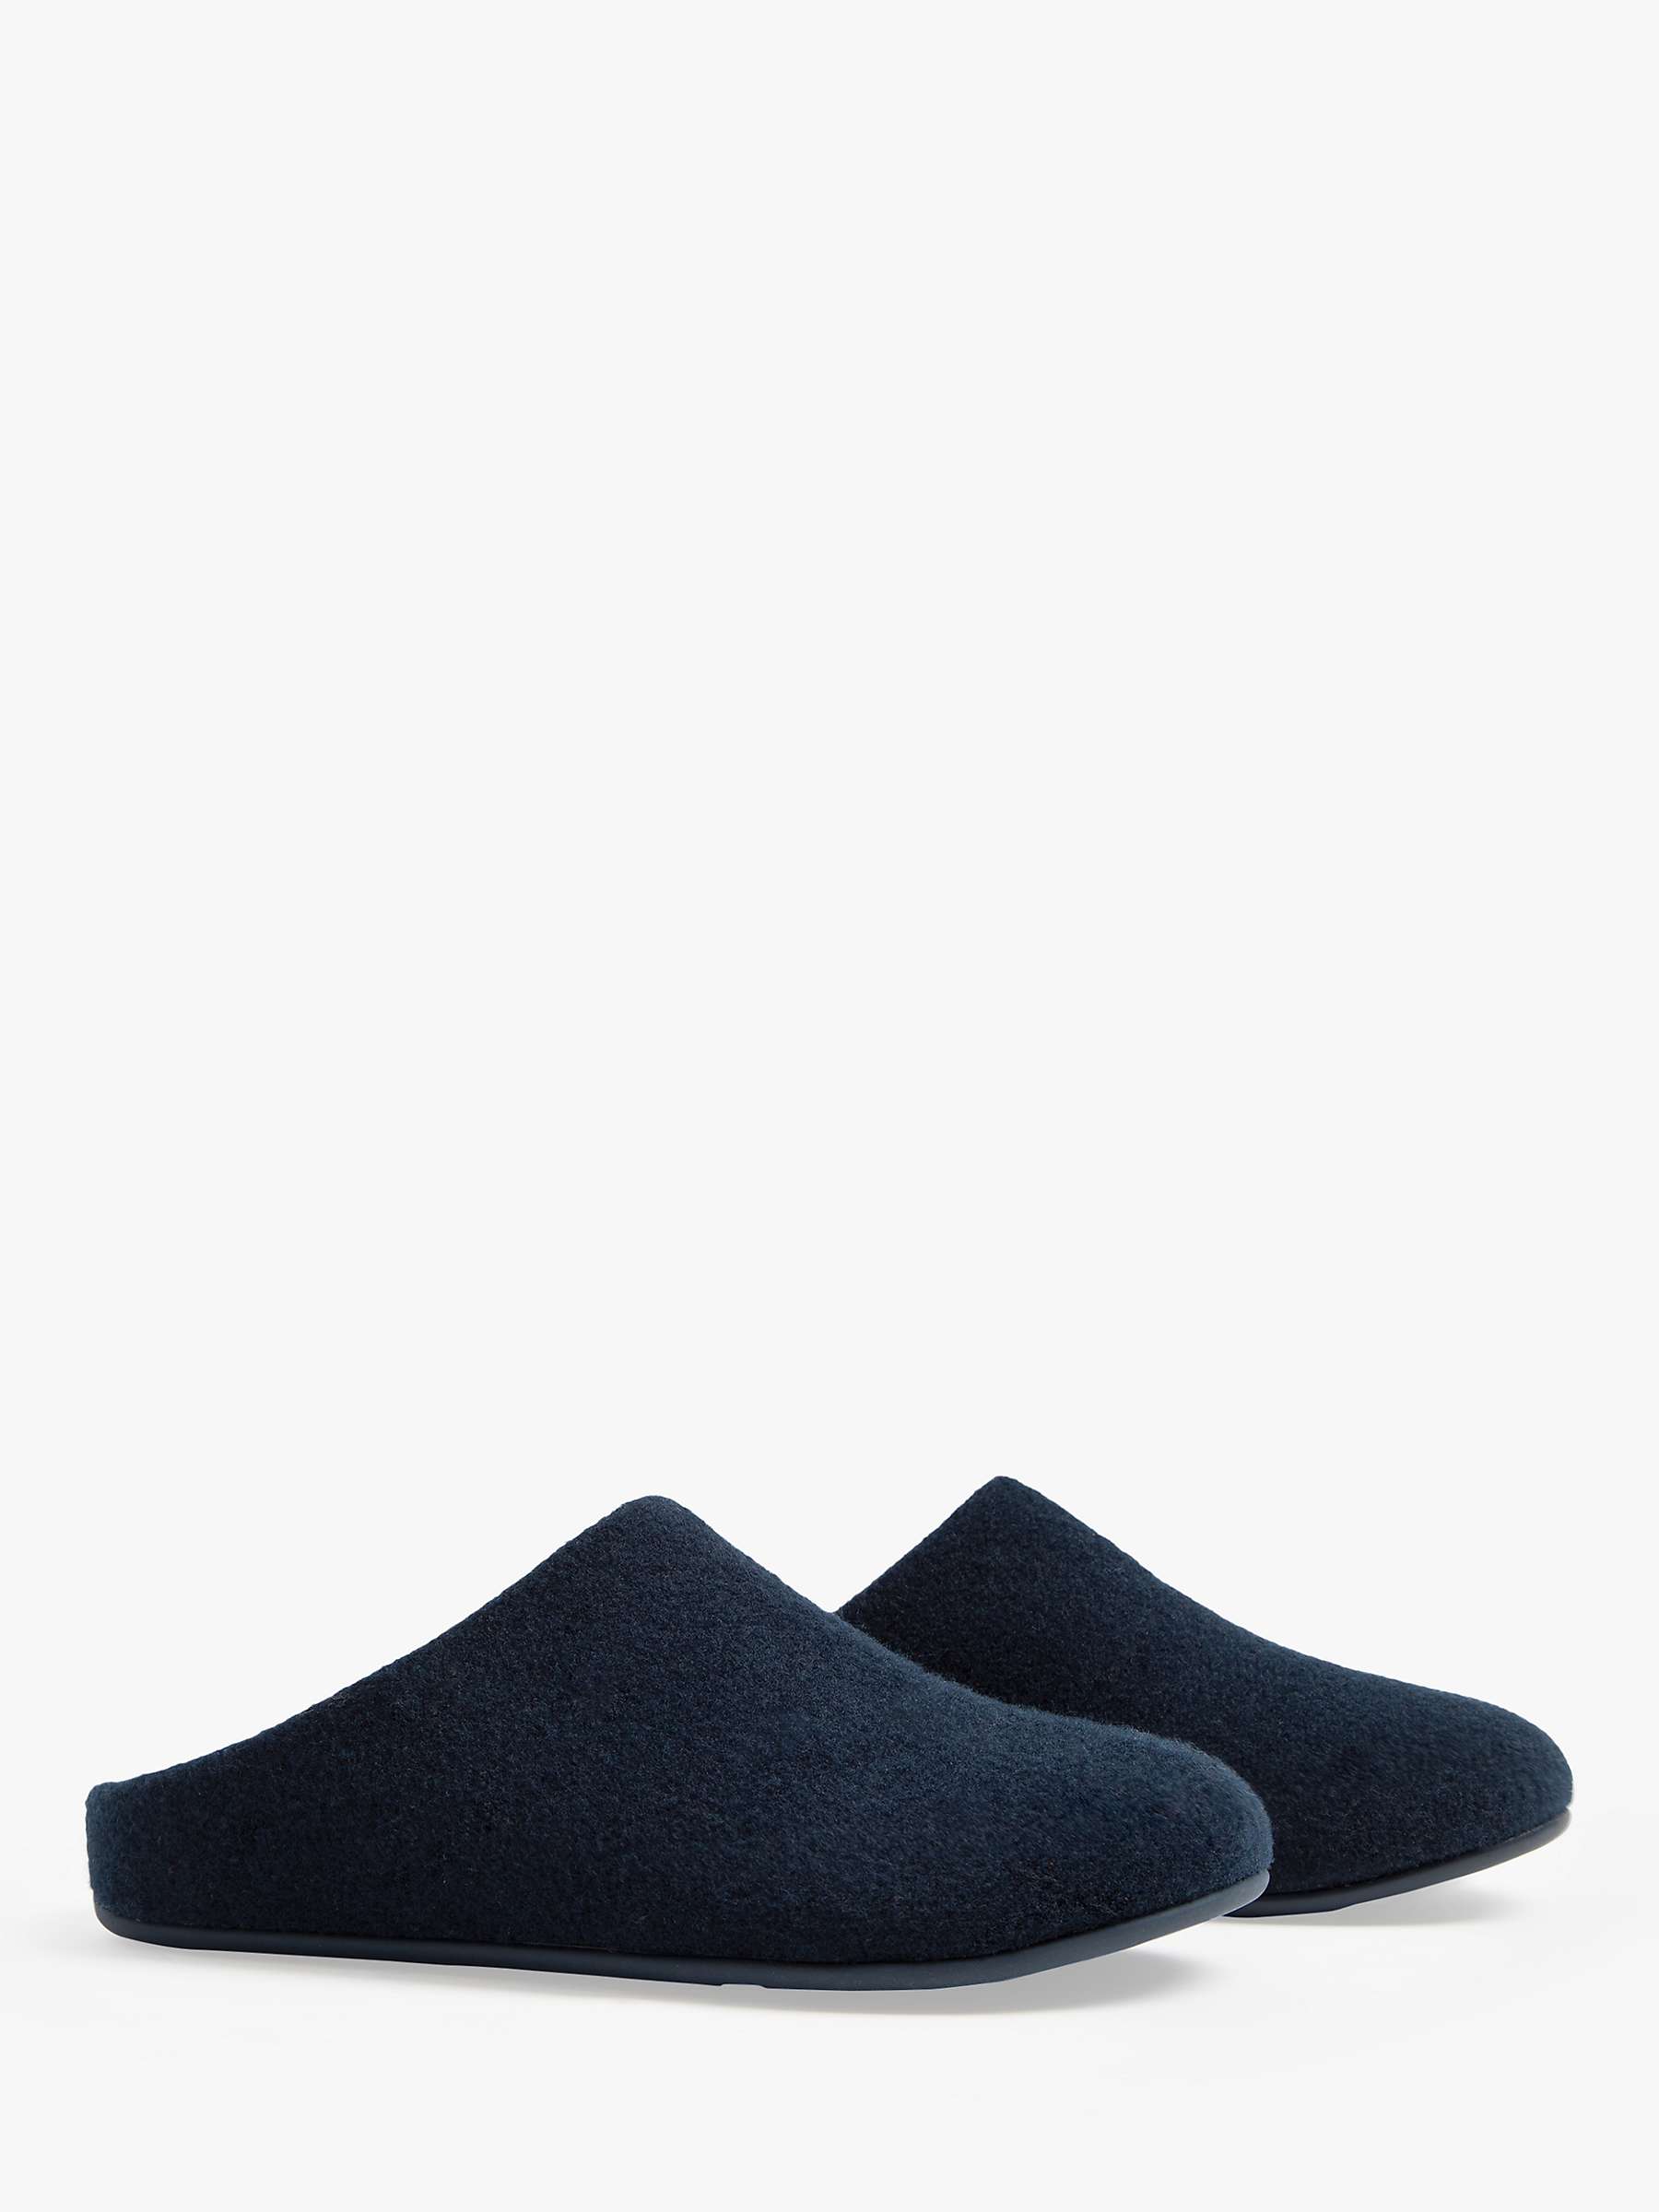 Buy FitFlop Chrissie Felt Slippers Online at johnlewis.com